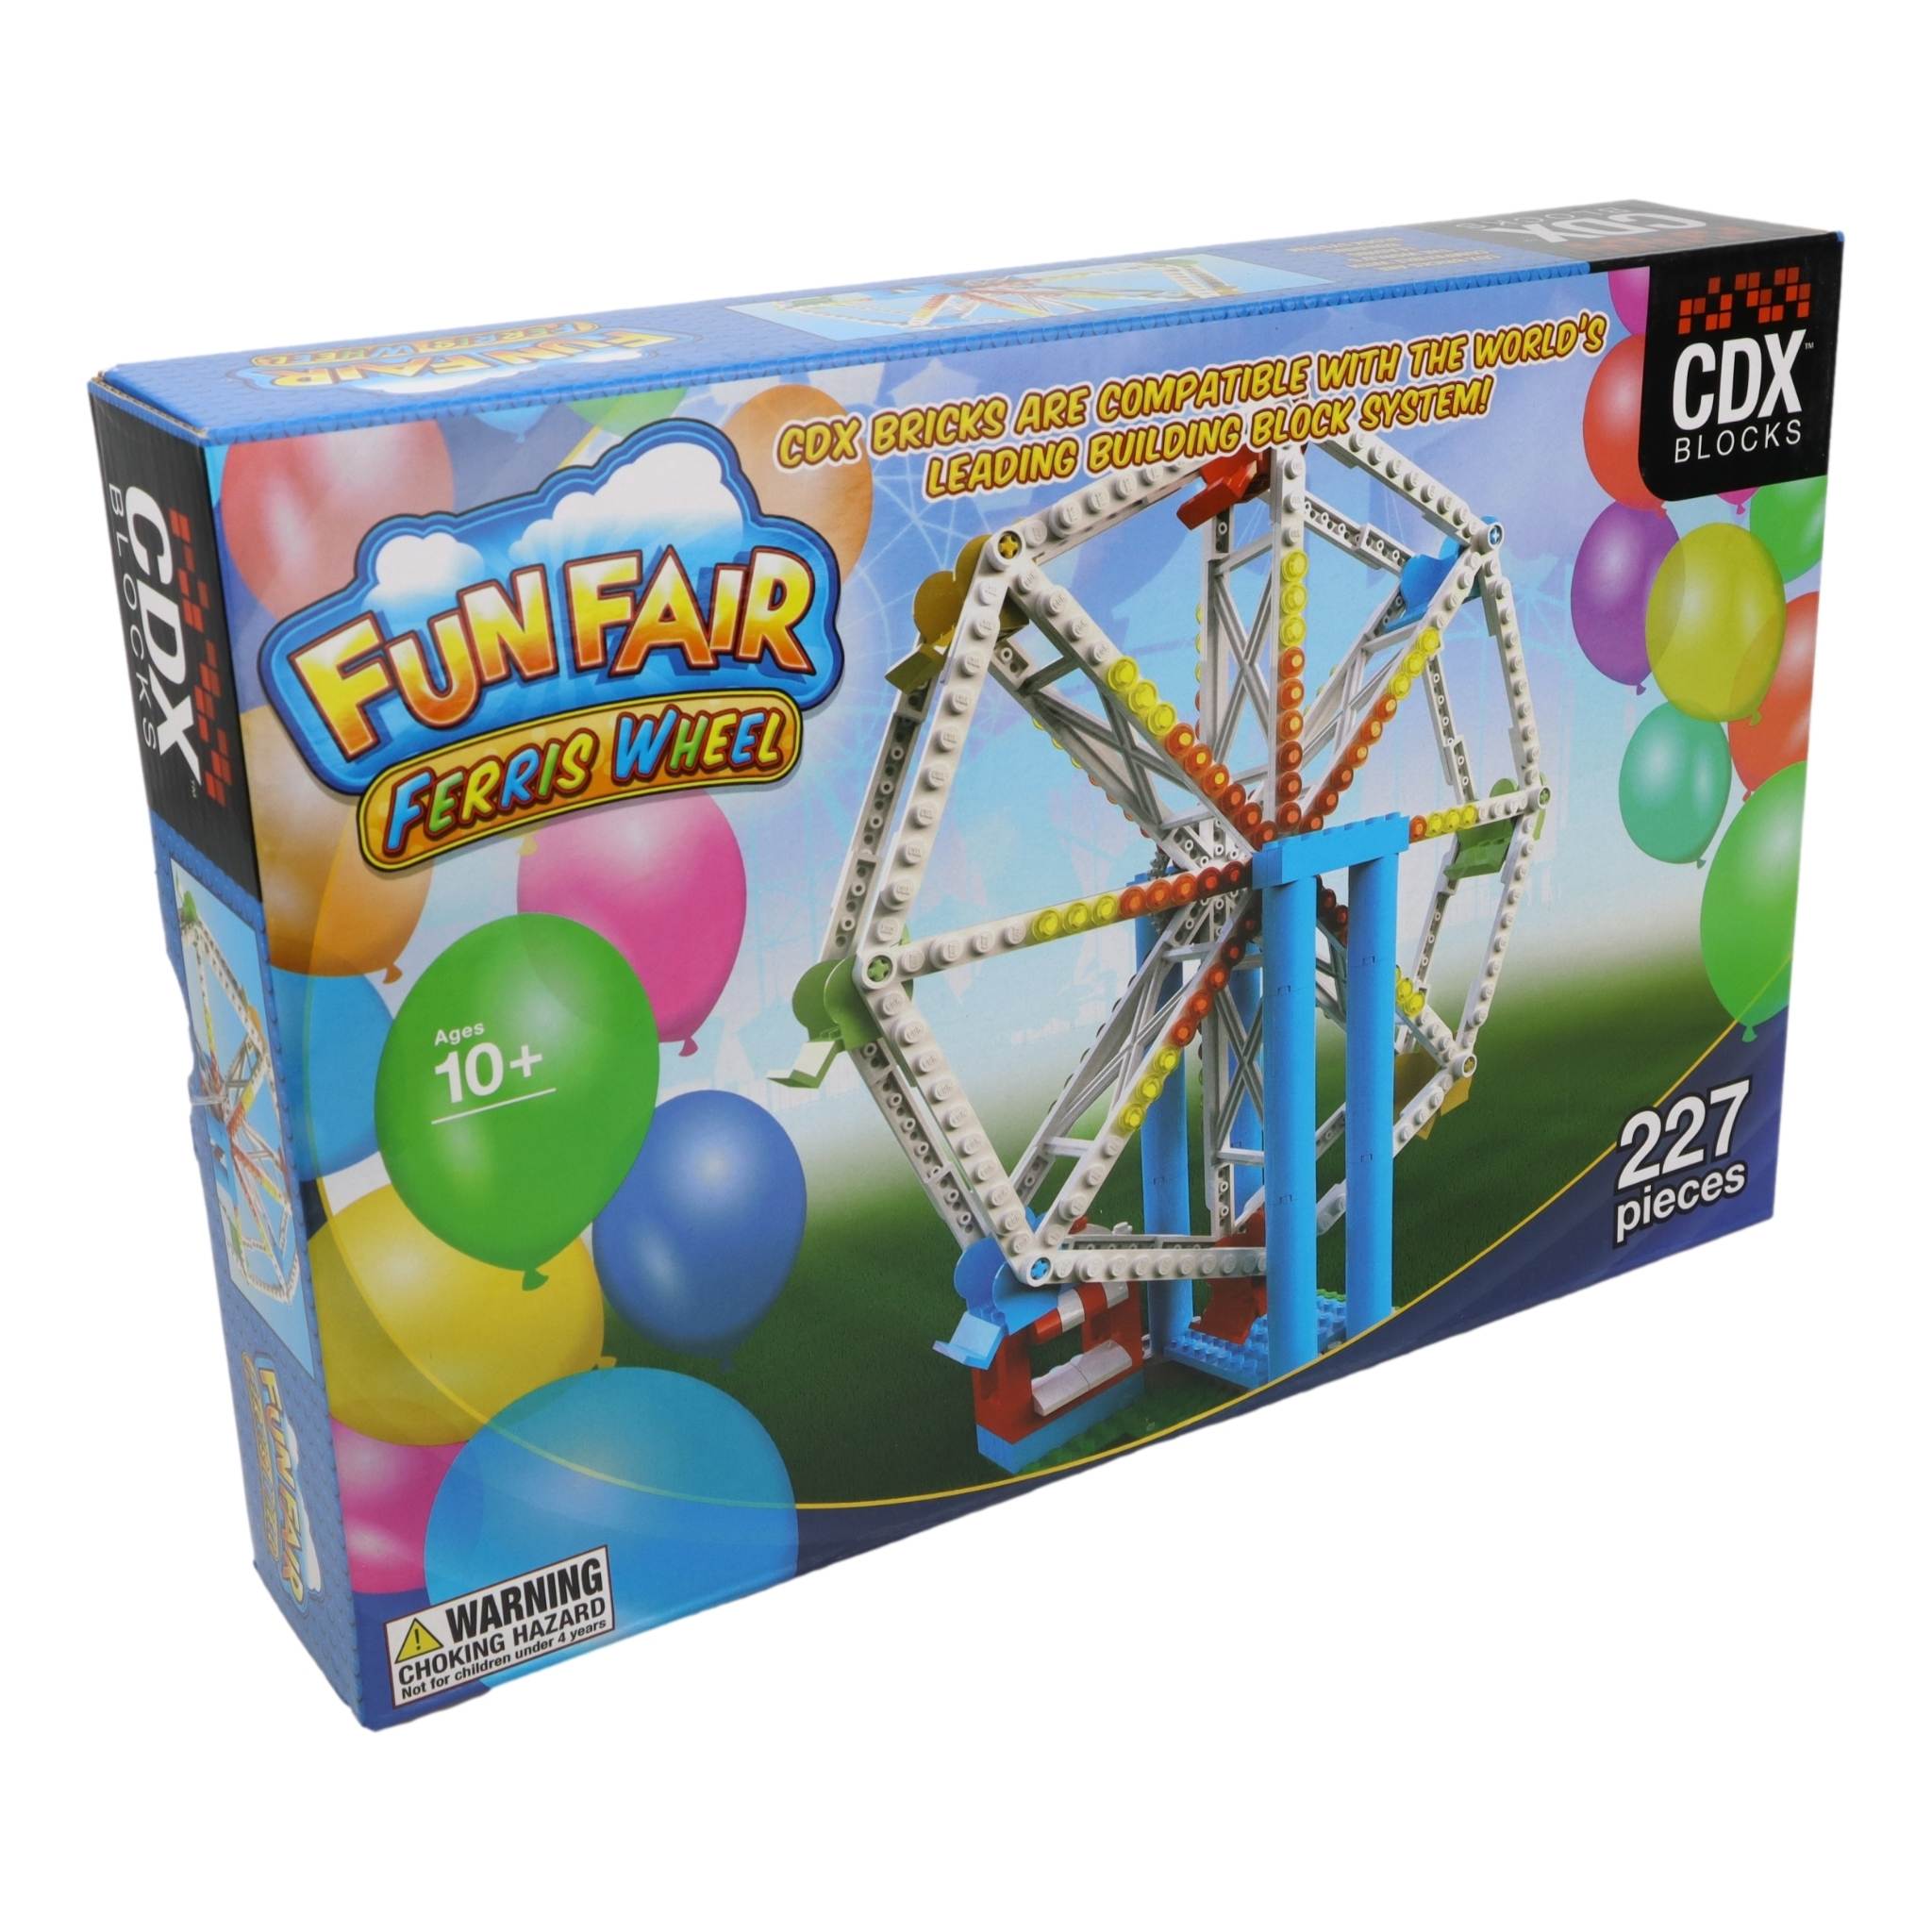  CDX Blocks: Flyer - 539 Pieces, Building Brick Set, Gravity  Powered Roller Coaster Model, Promotes STEM Learning : Toys & Games